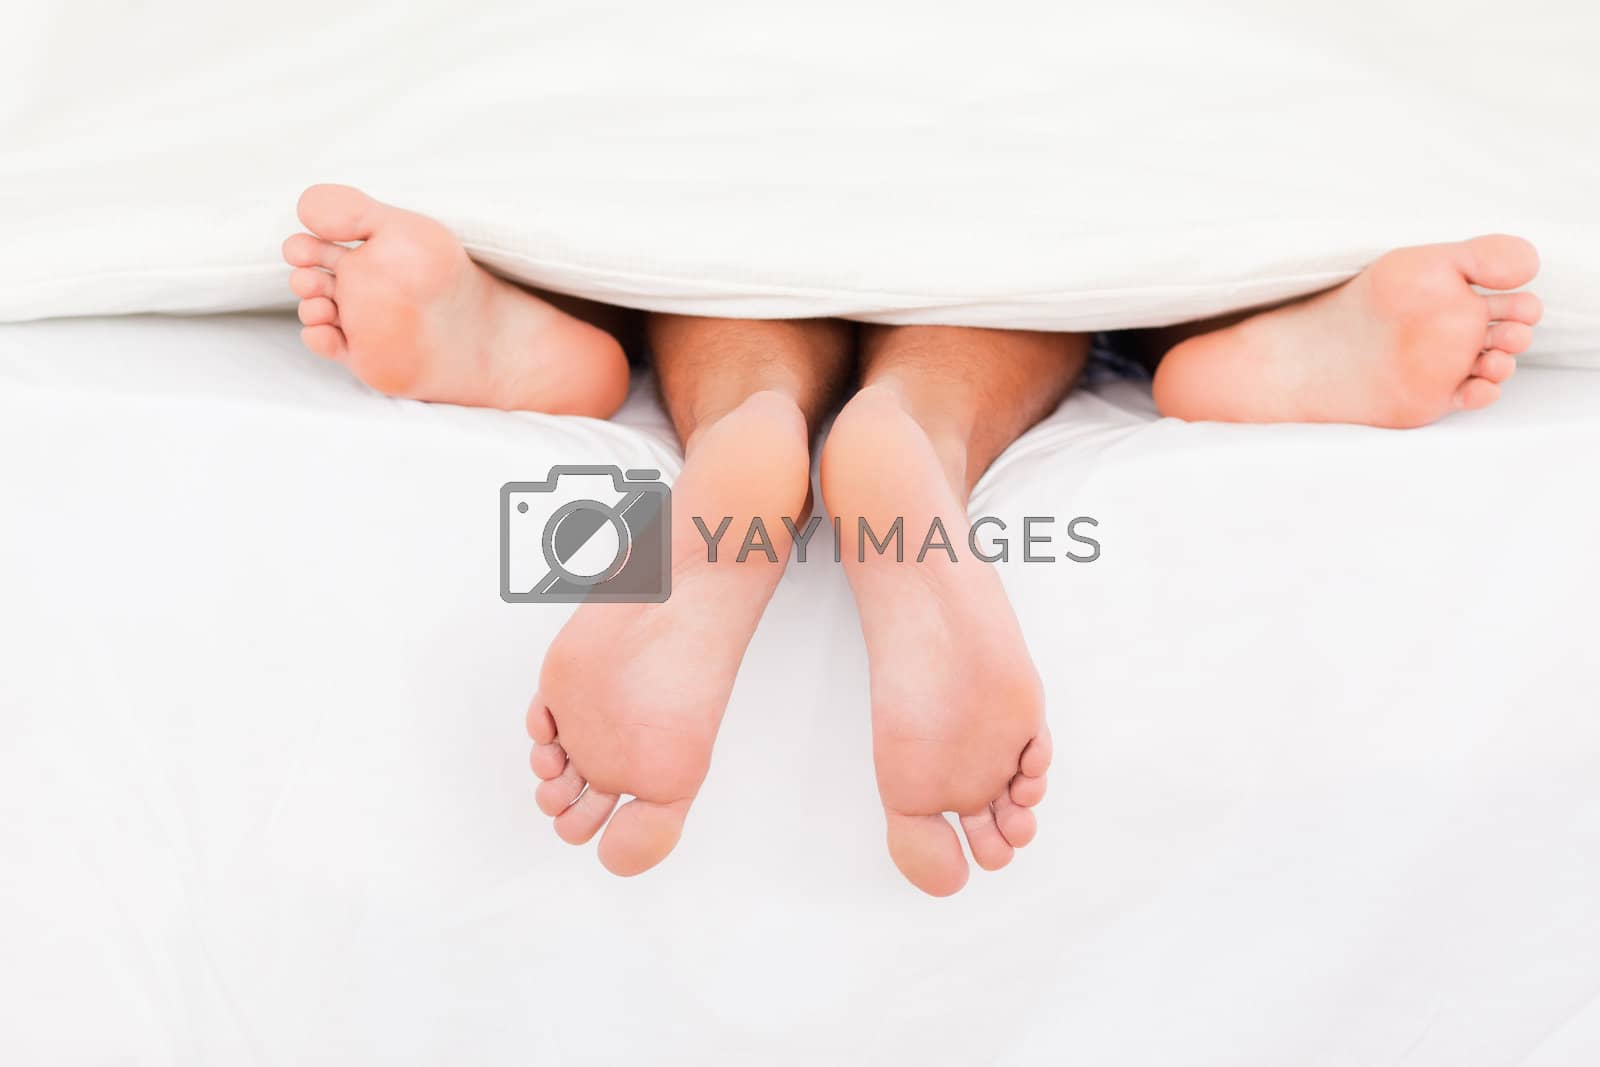 Royalty free image of A couple's feet by Wavebreakmedia